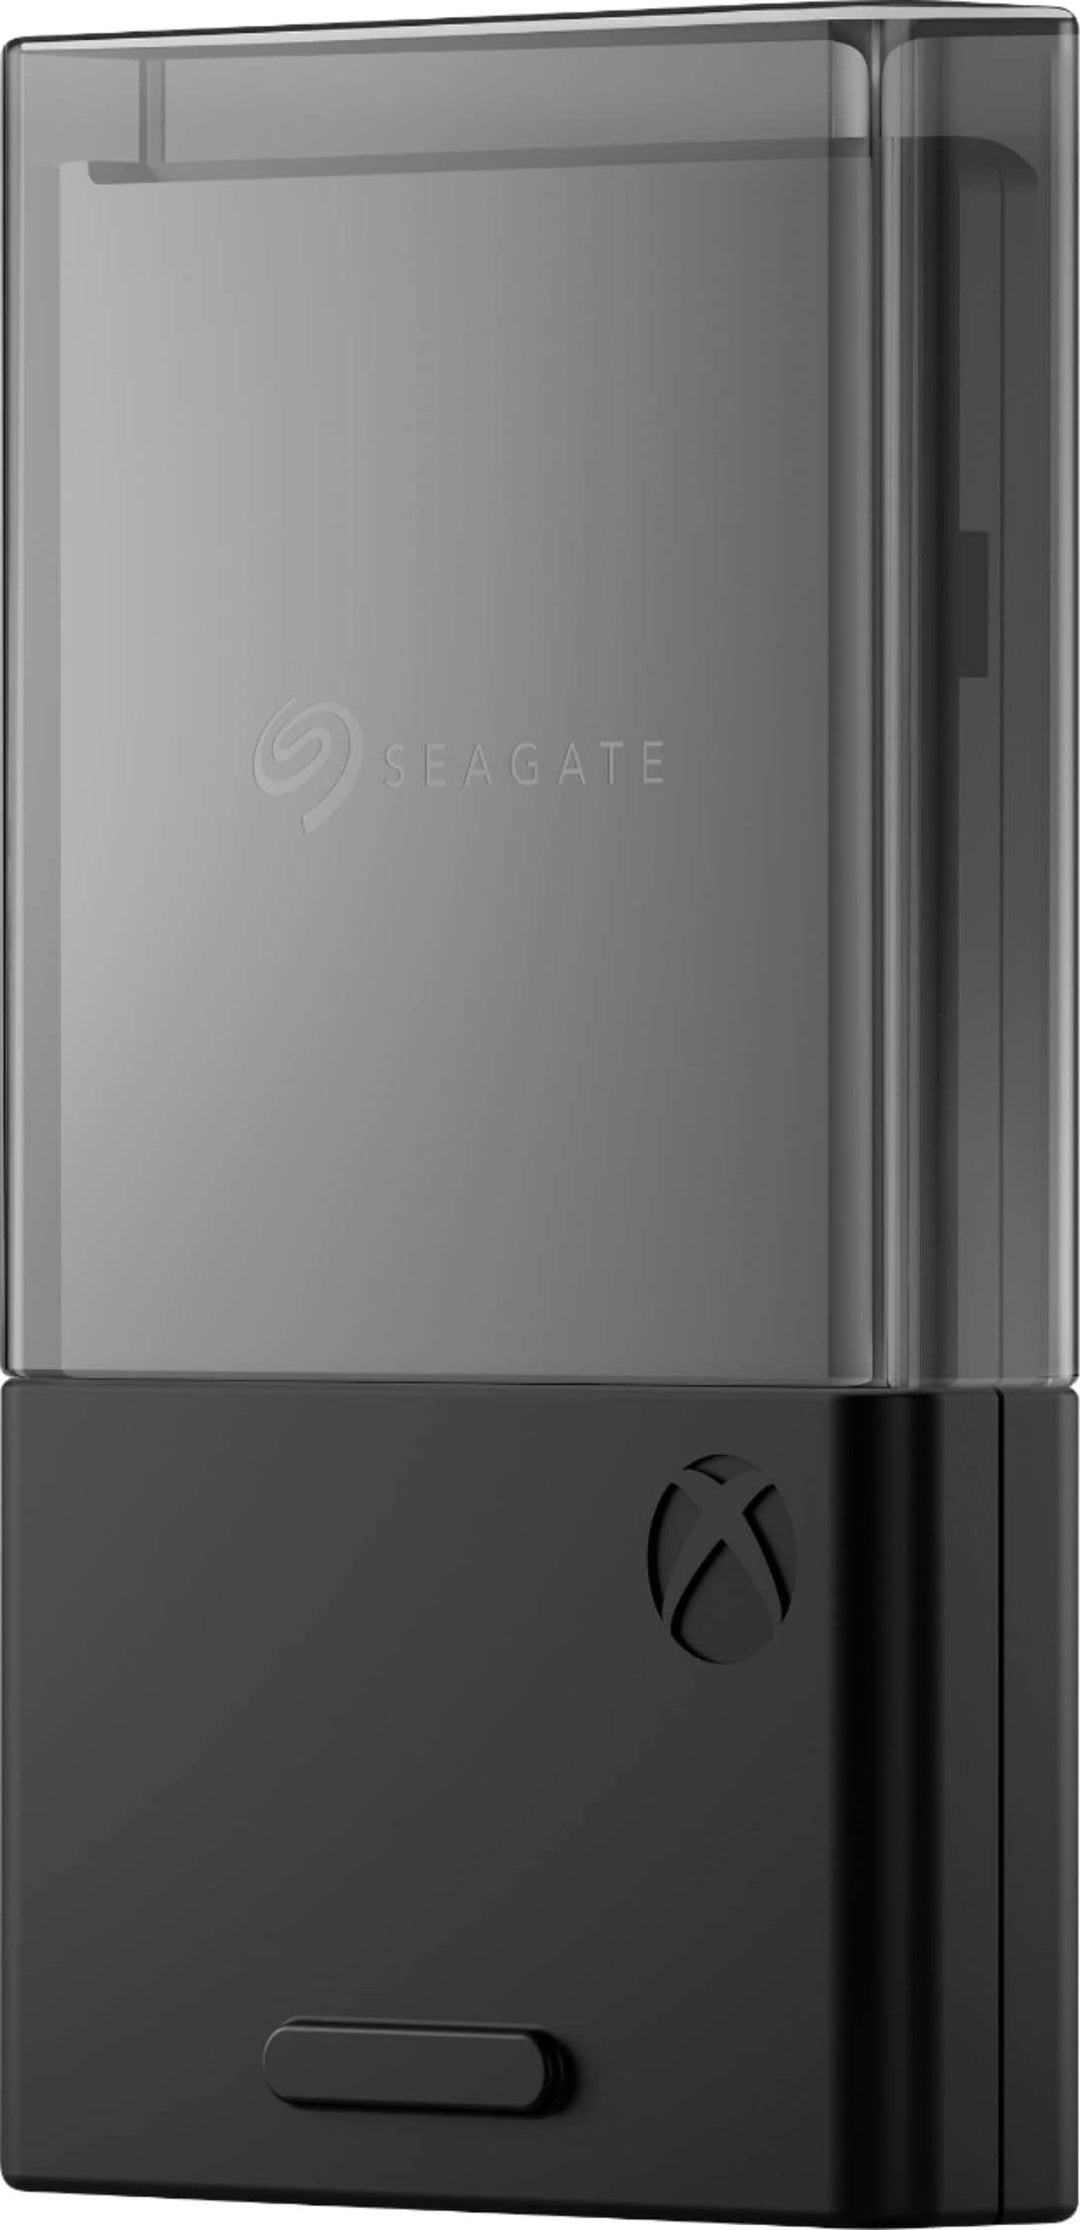 Seagate - 1TB Storage Expansion Card for Xbox Series X|S Internal NVMe SSD - Black_1